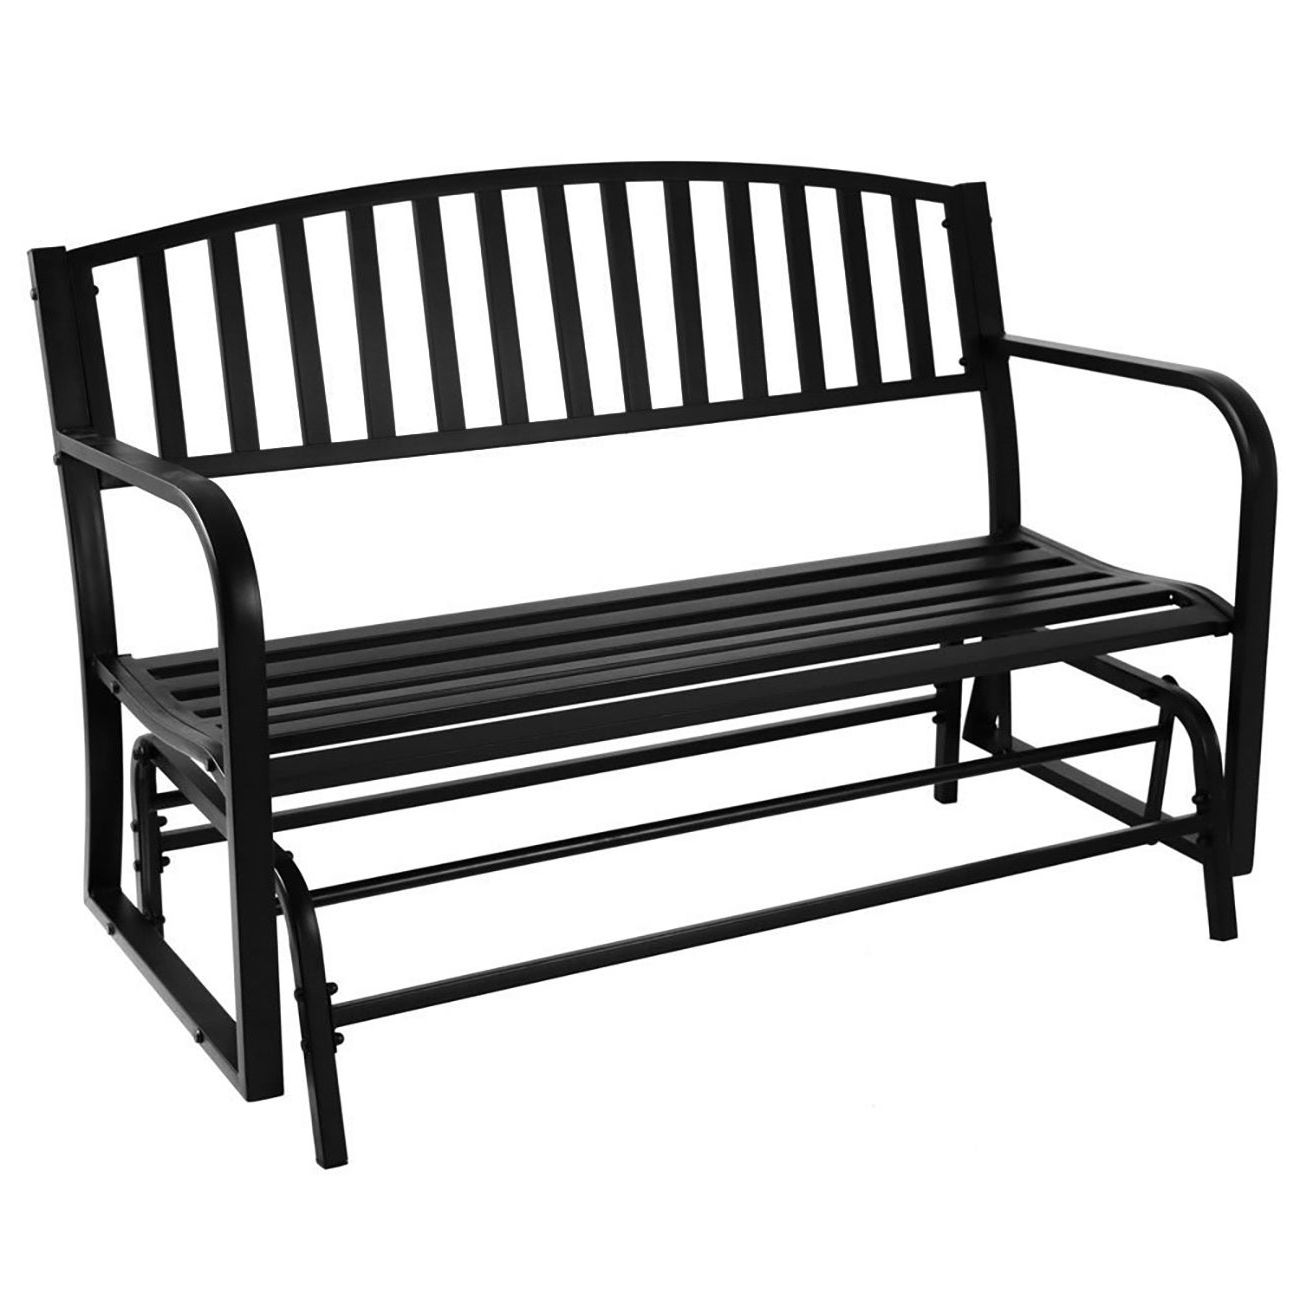 Widely Used Belleze 50" Outdoor Garden Bench Glider Rocker Seat Swing, Black With Regard To Black Outdoor Durable Steel Frame Patio Swing Glider Bench Chairs (View 15 of 30)